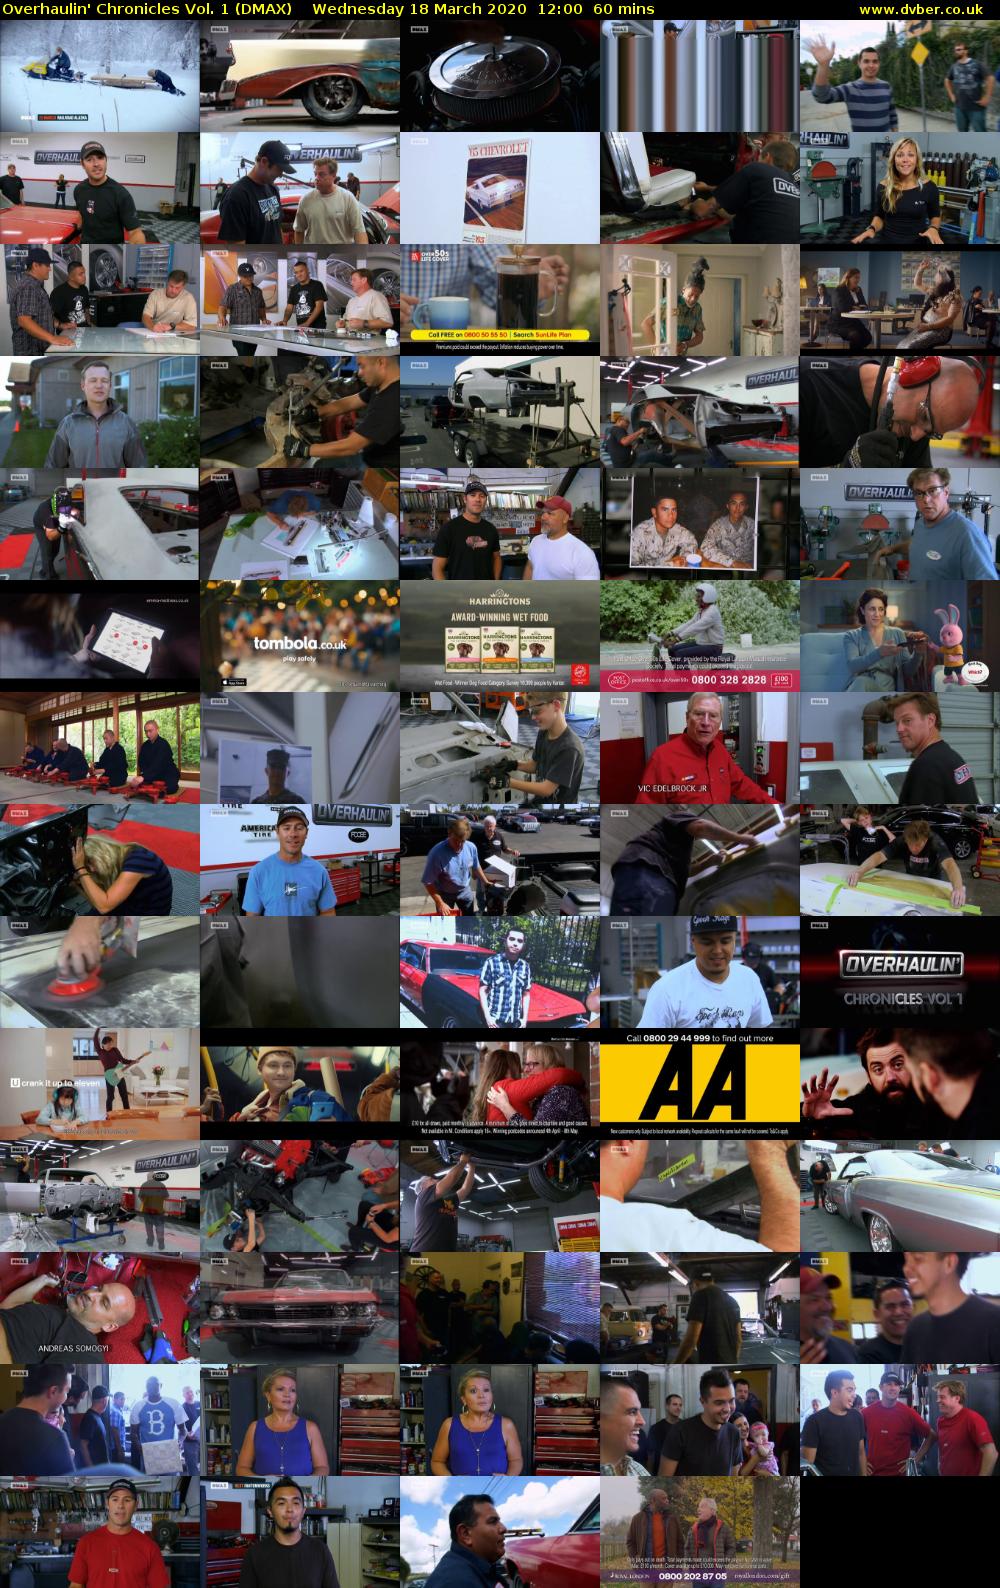 Overhaulin' Chronicles Vol. 1 (DMAX) Wednesday 18 March 2020 12:00 - 13:00